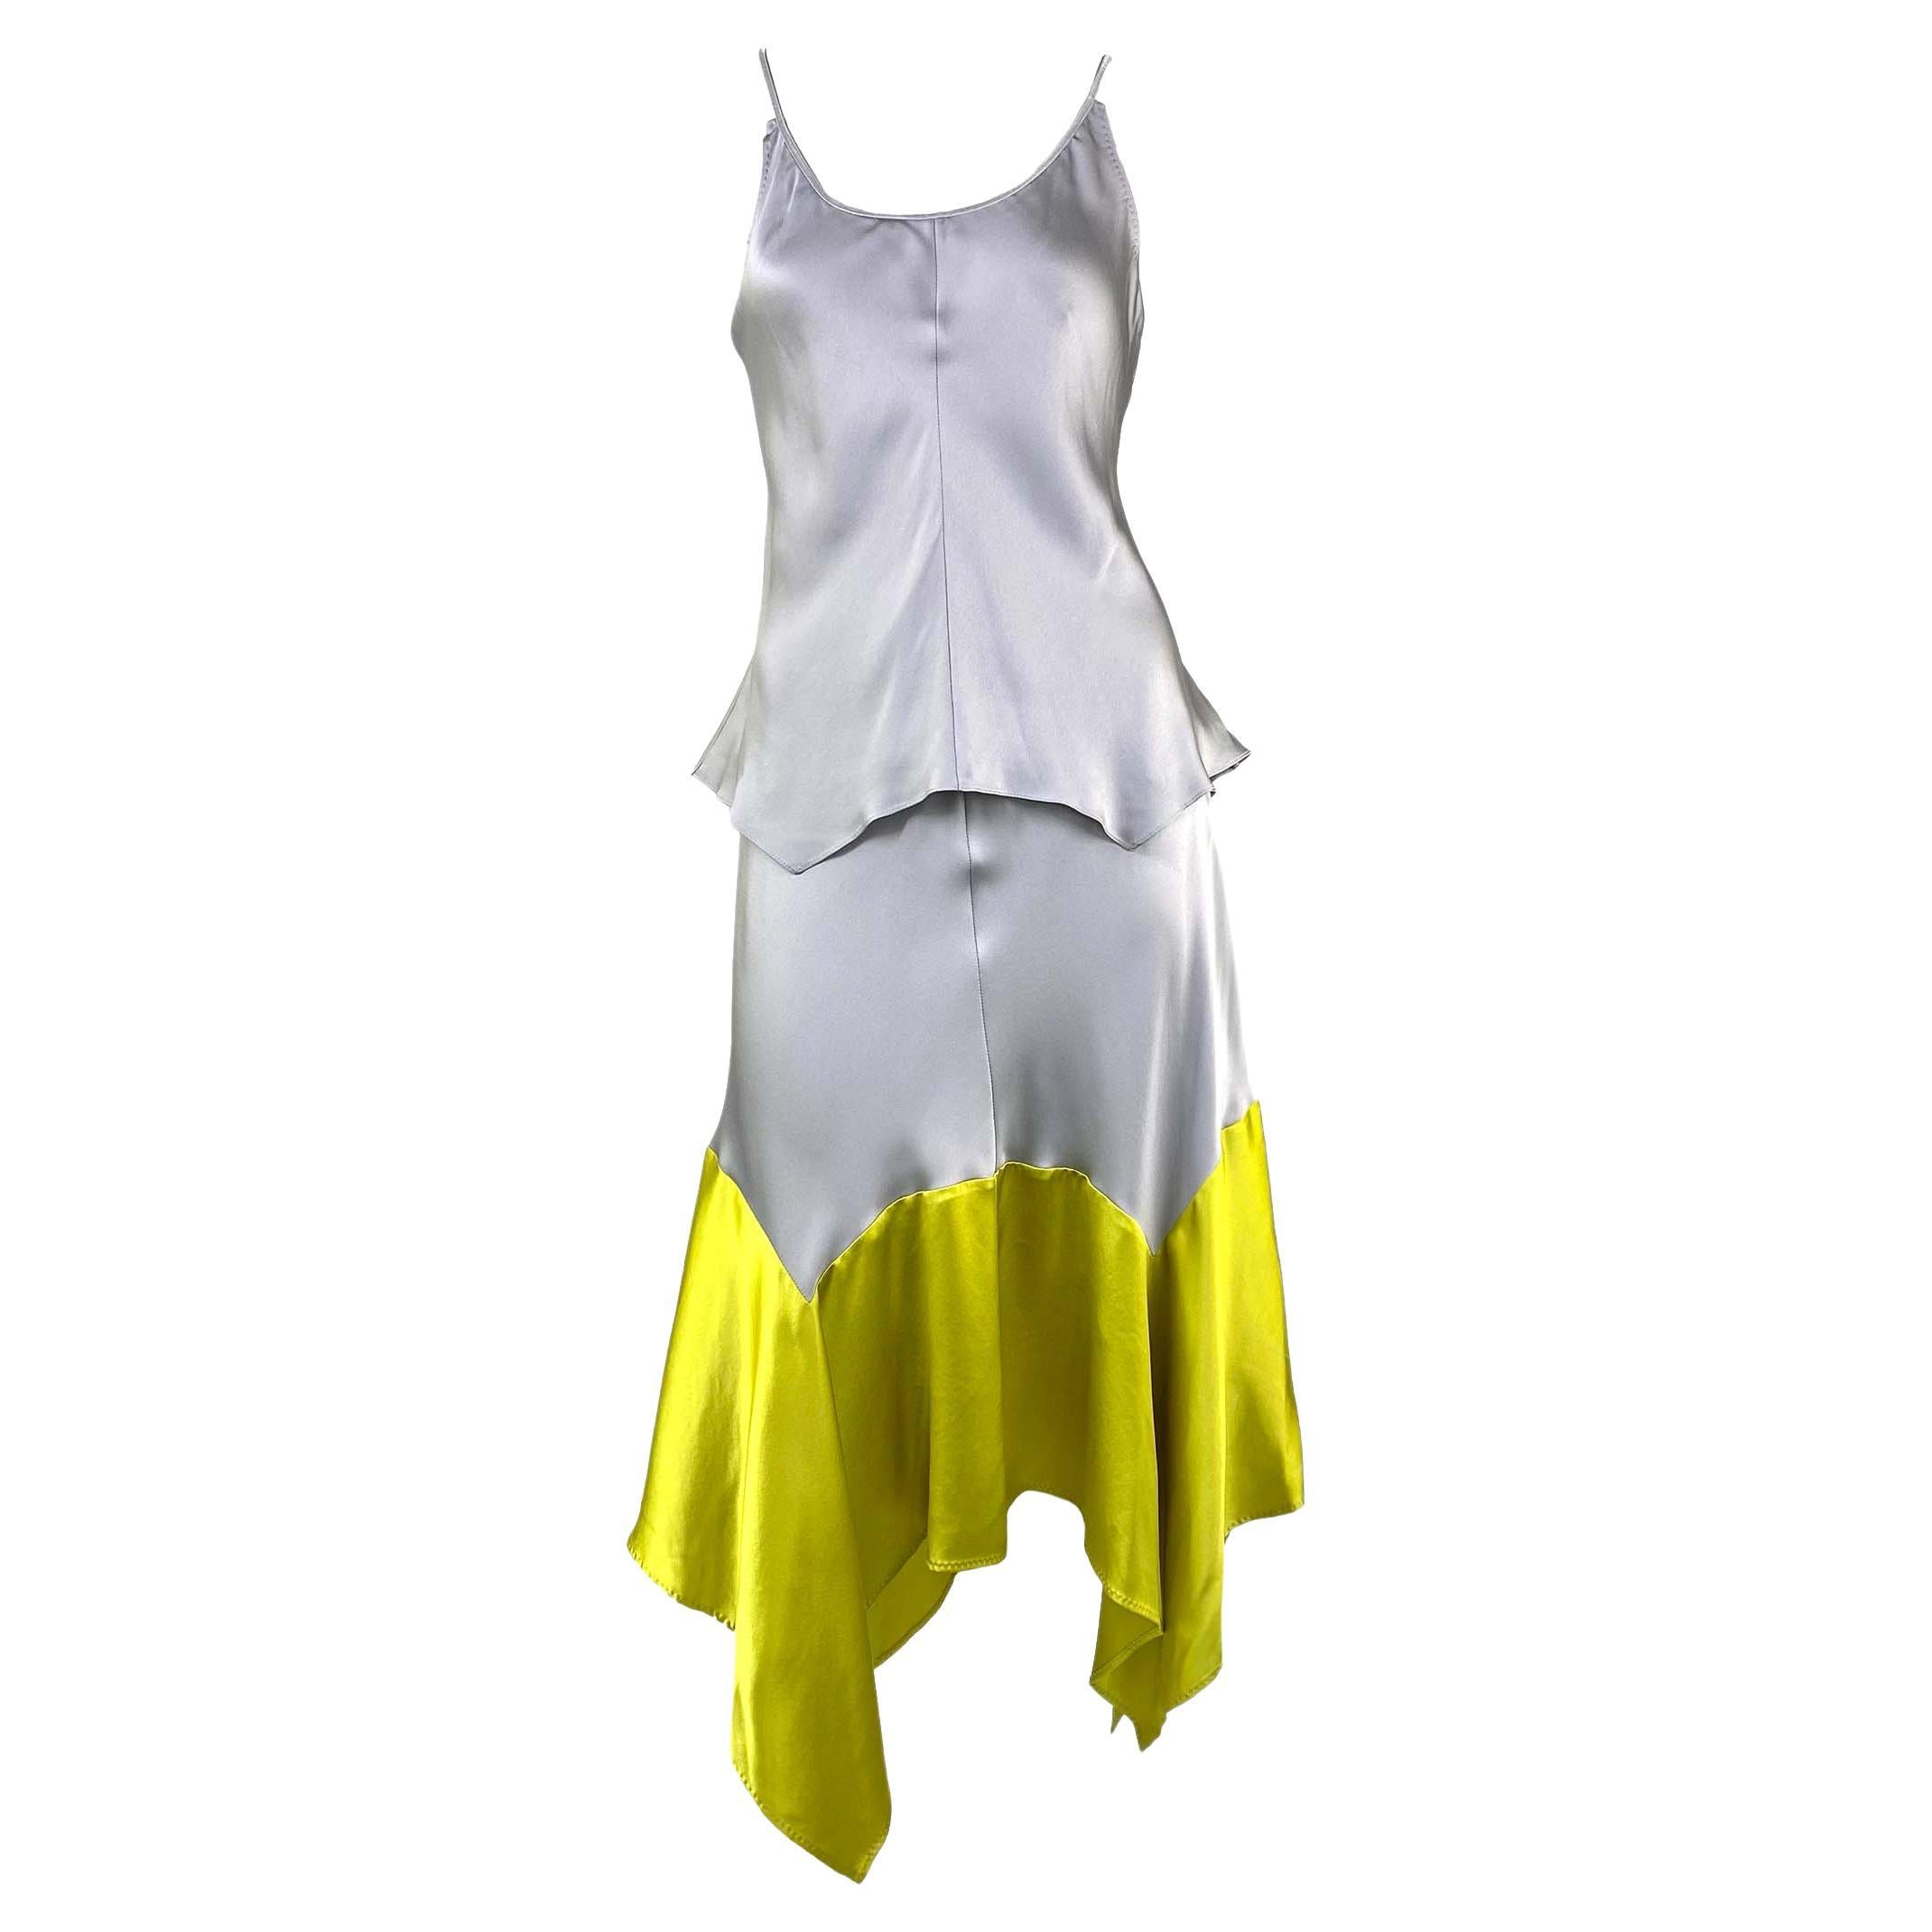 NWT S/S 2004 Yves Saint Laurent by Tom Ford Yellow Grey Handkerchief Dress For Sale